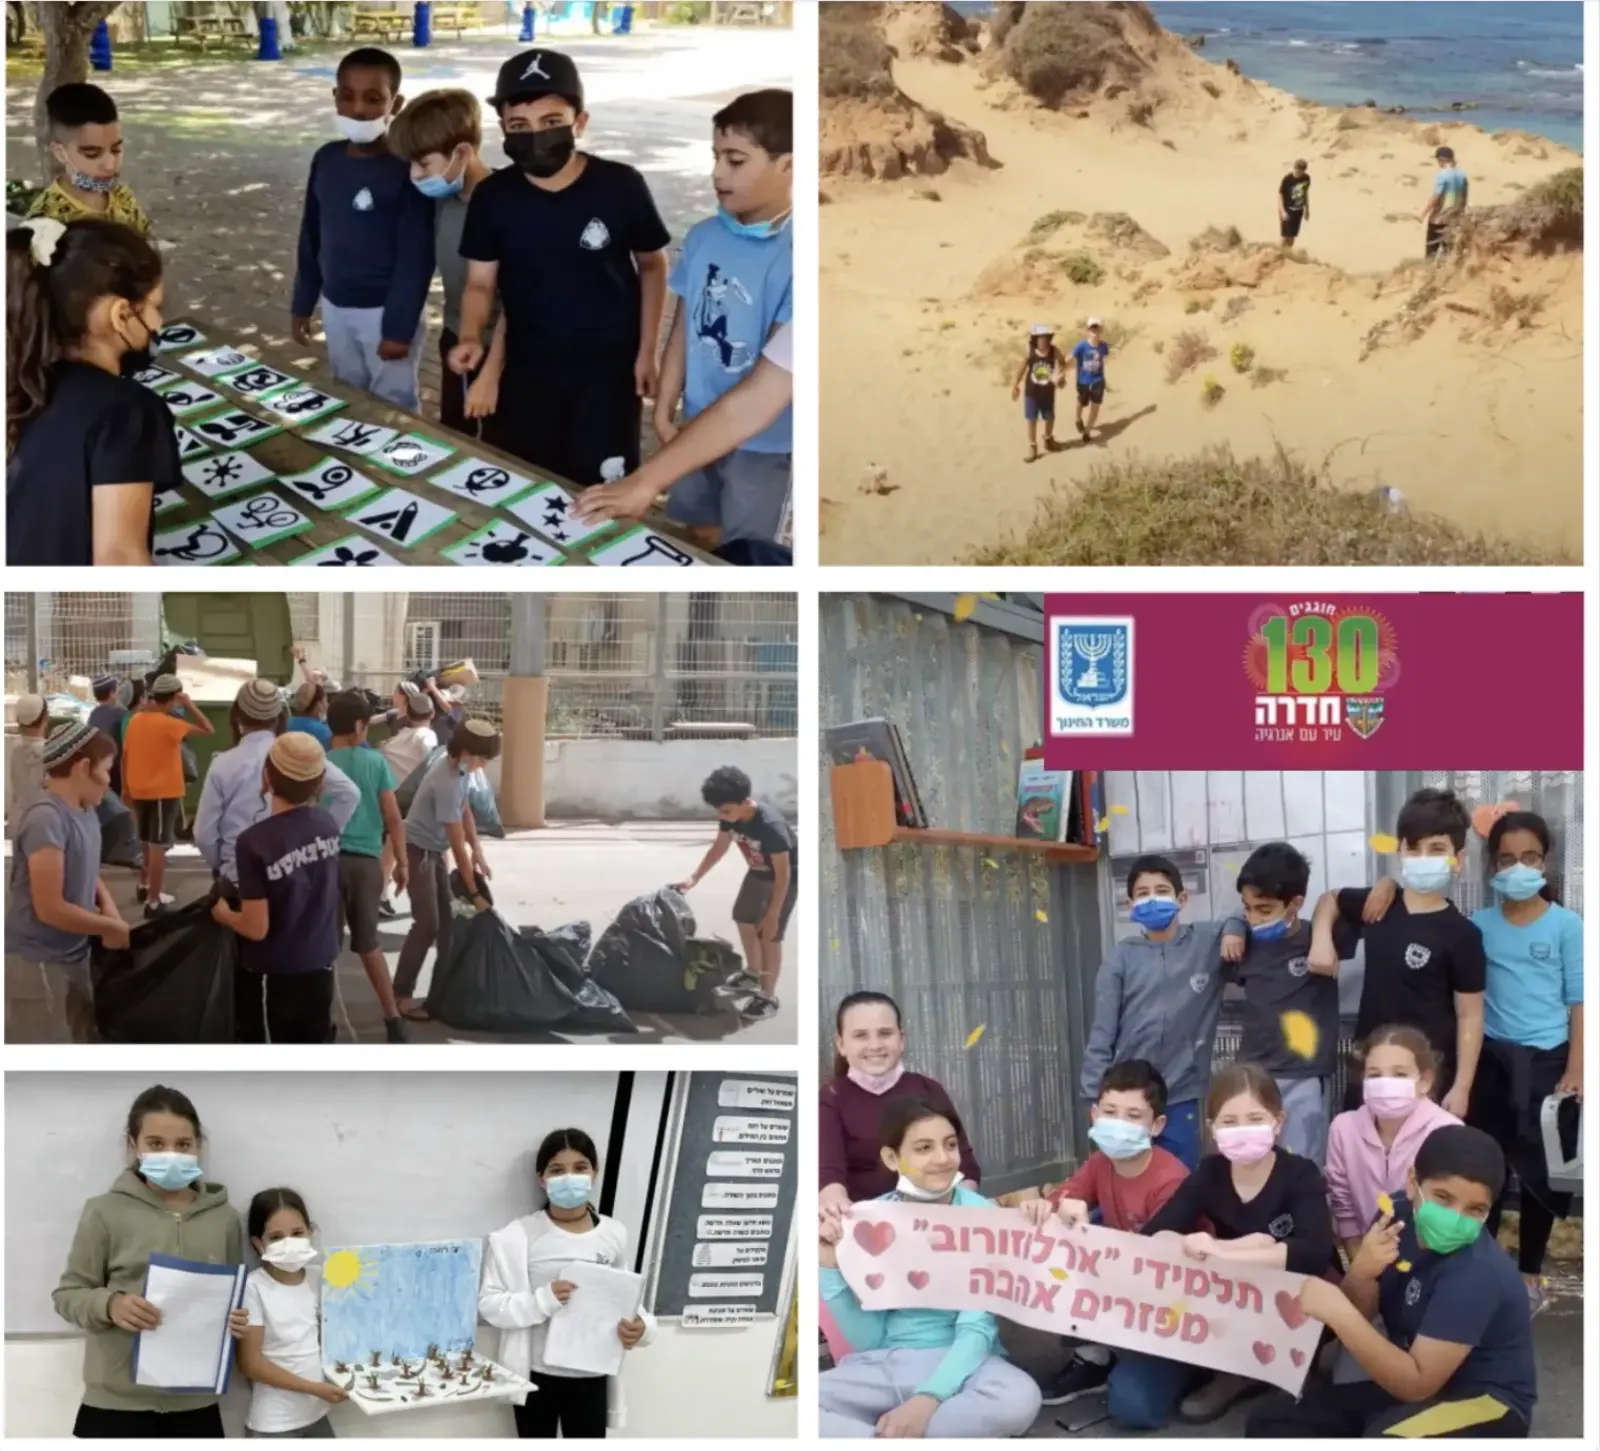 Many of the schools took part in cleanups and visualizing future plans for their communities